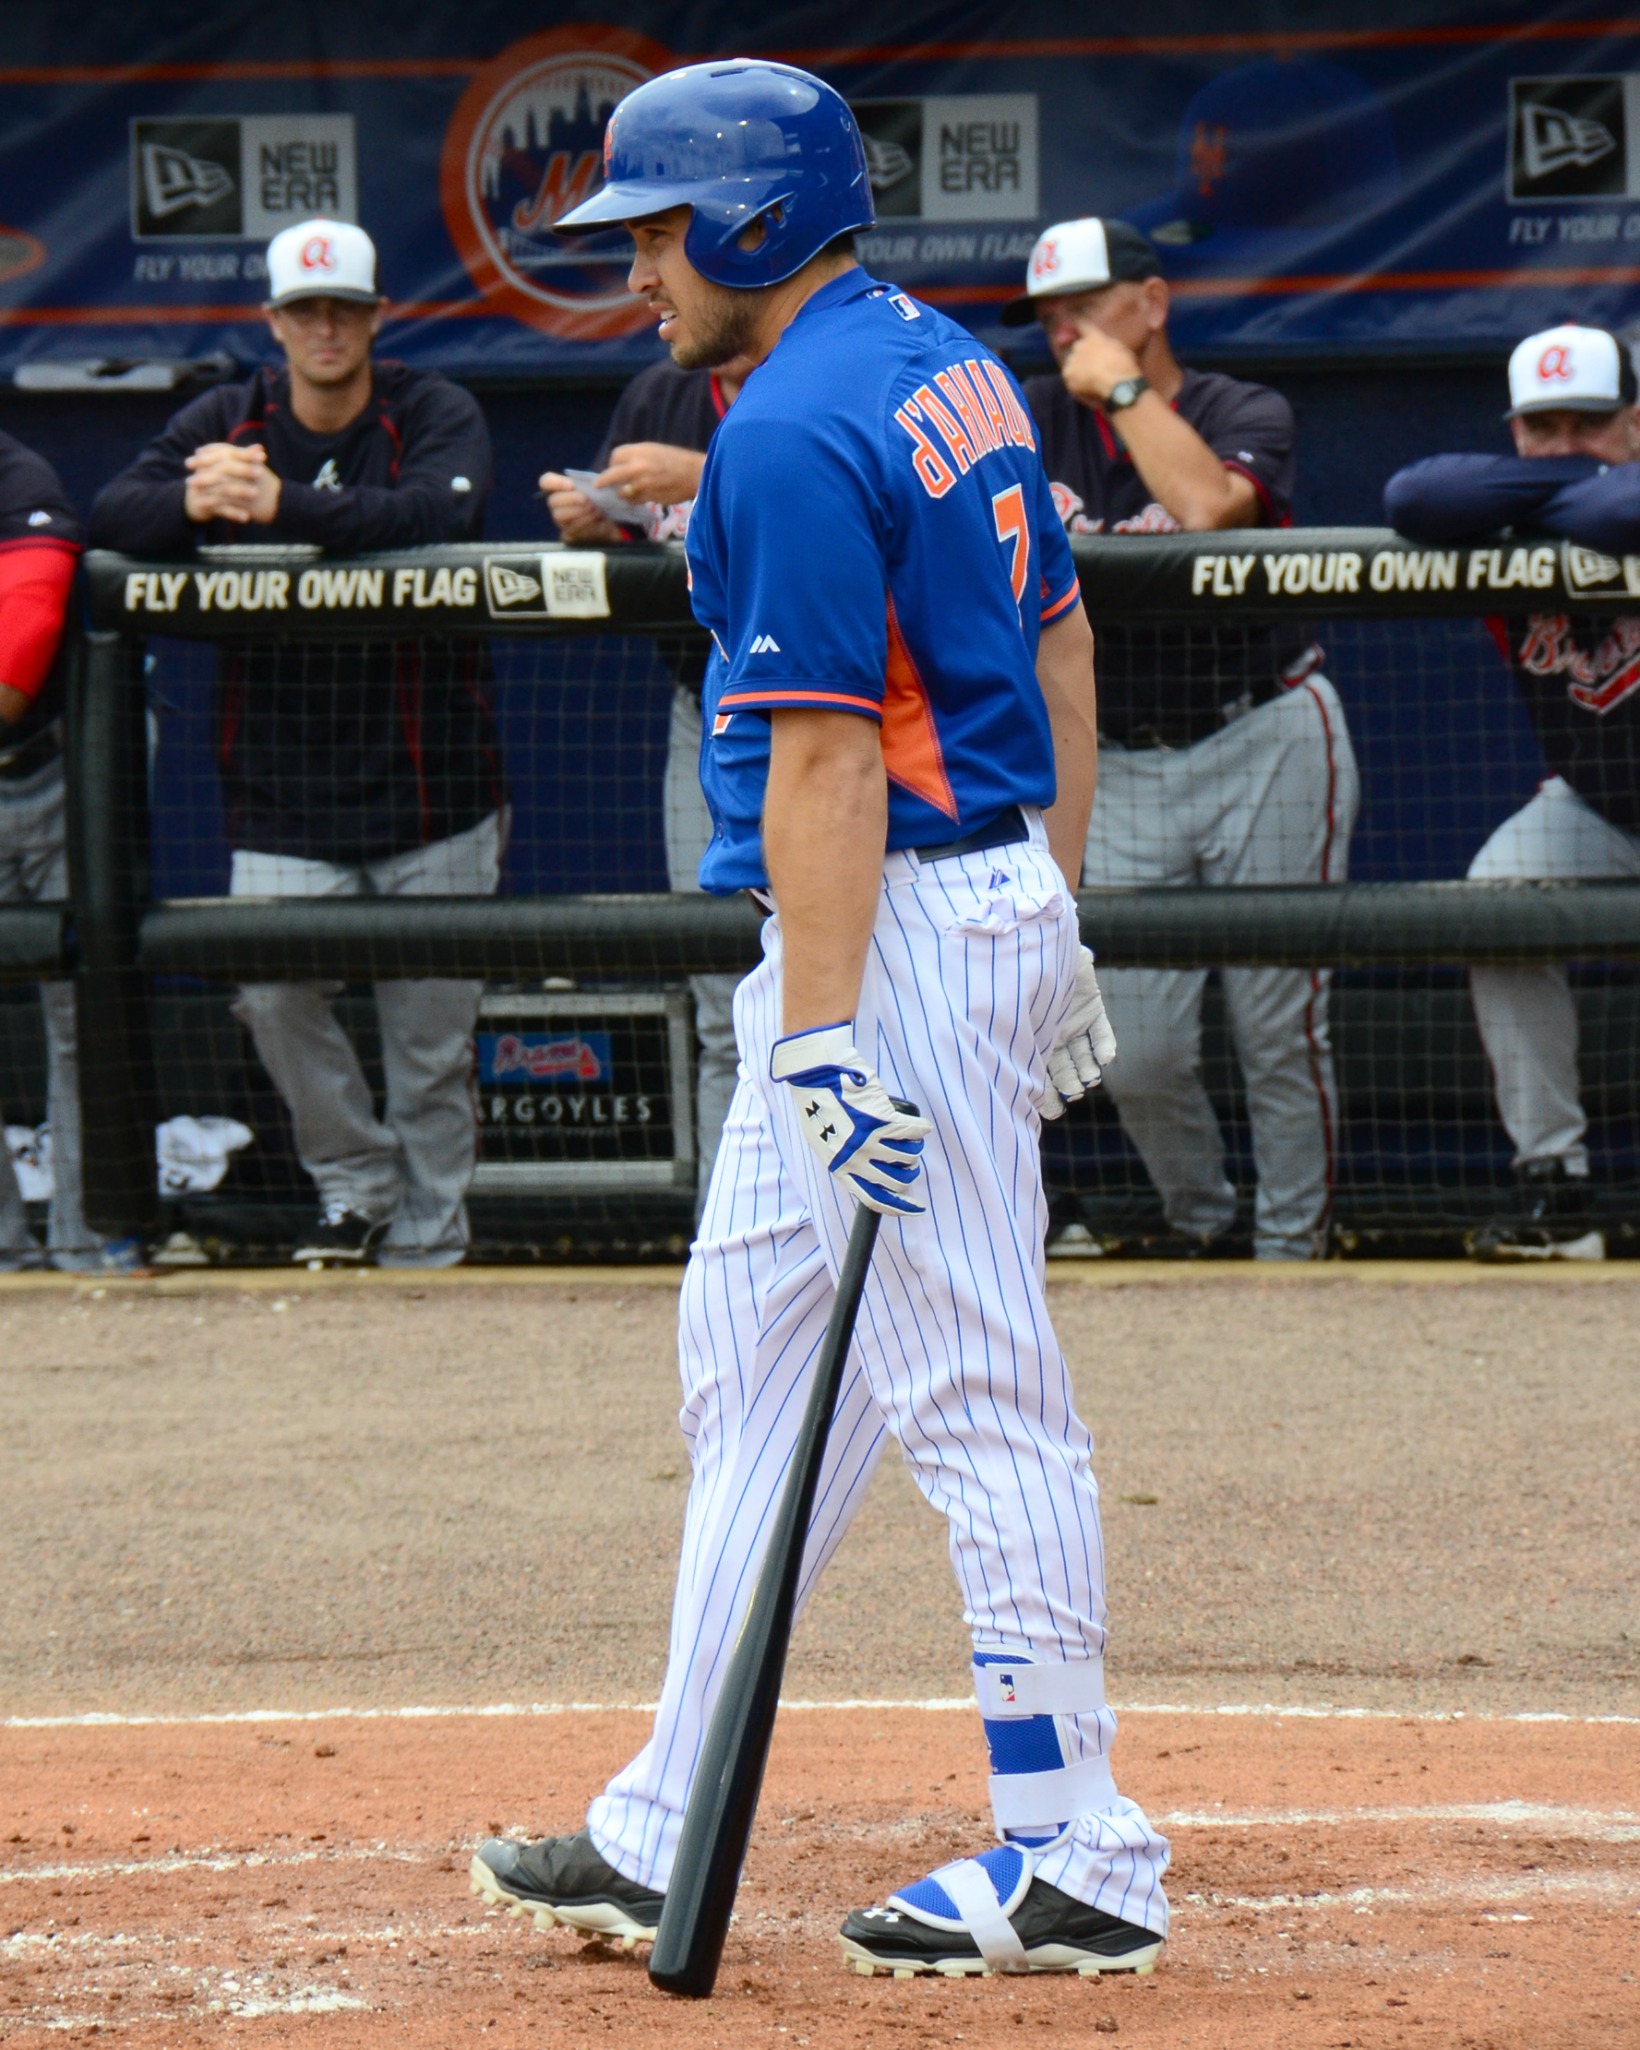 a baseball player is standing with a bat